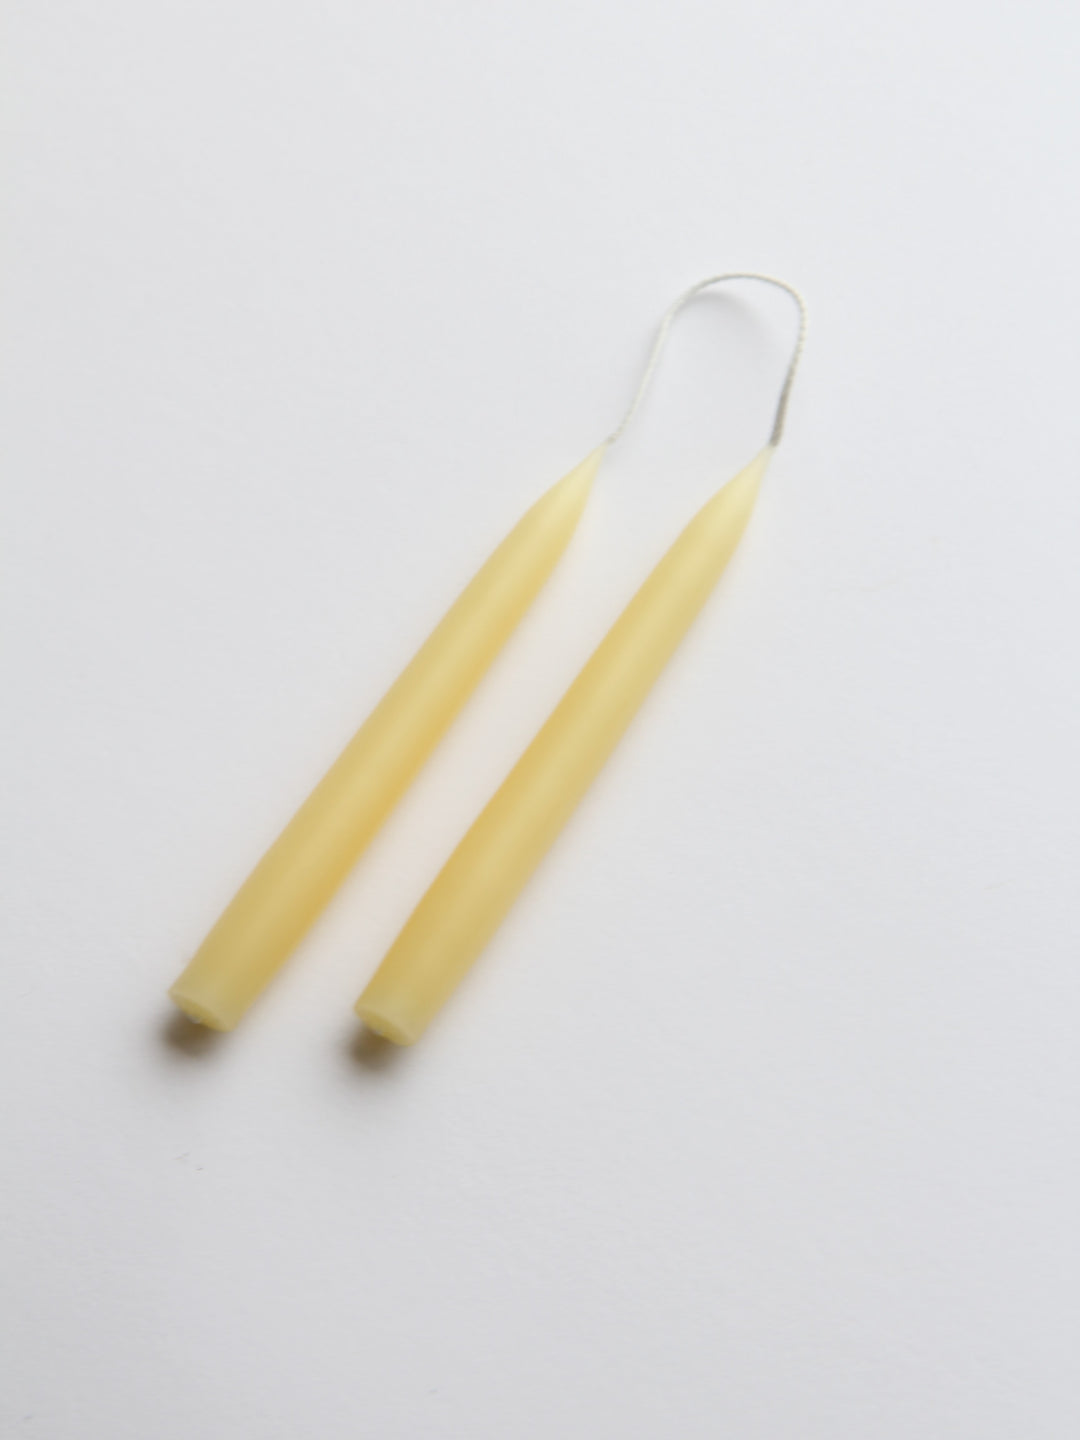 Small Pair of Candles / Pastel Yellow